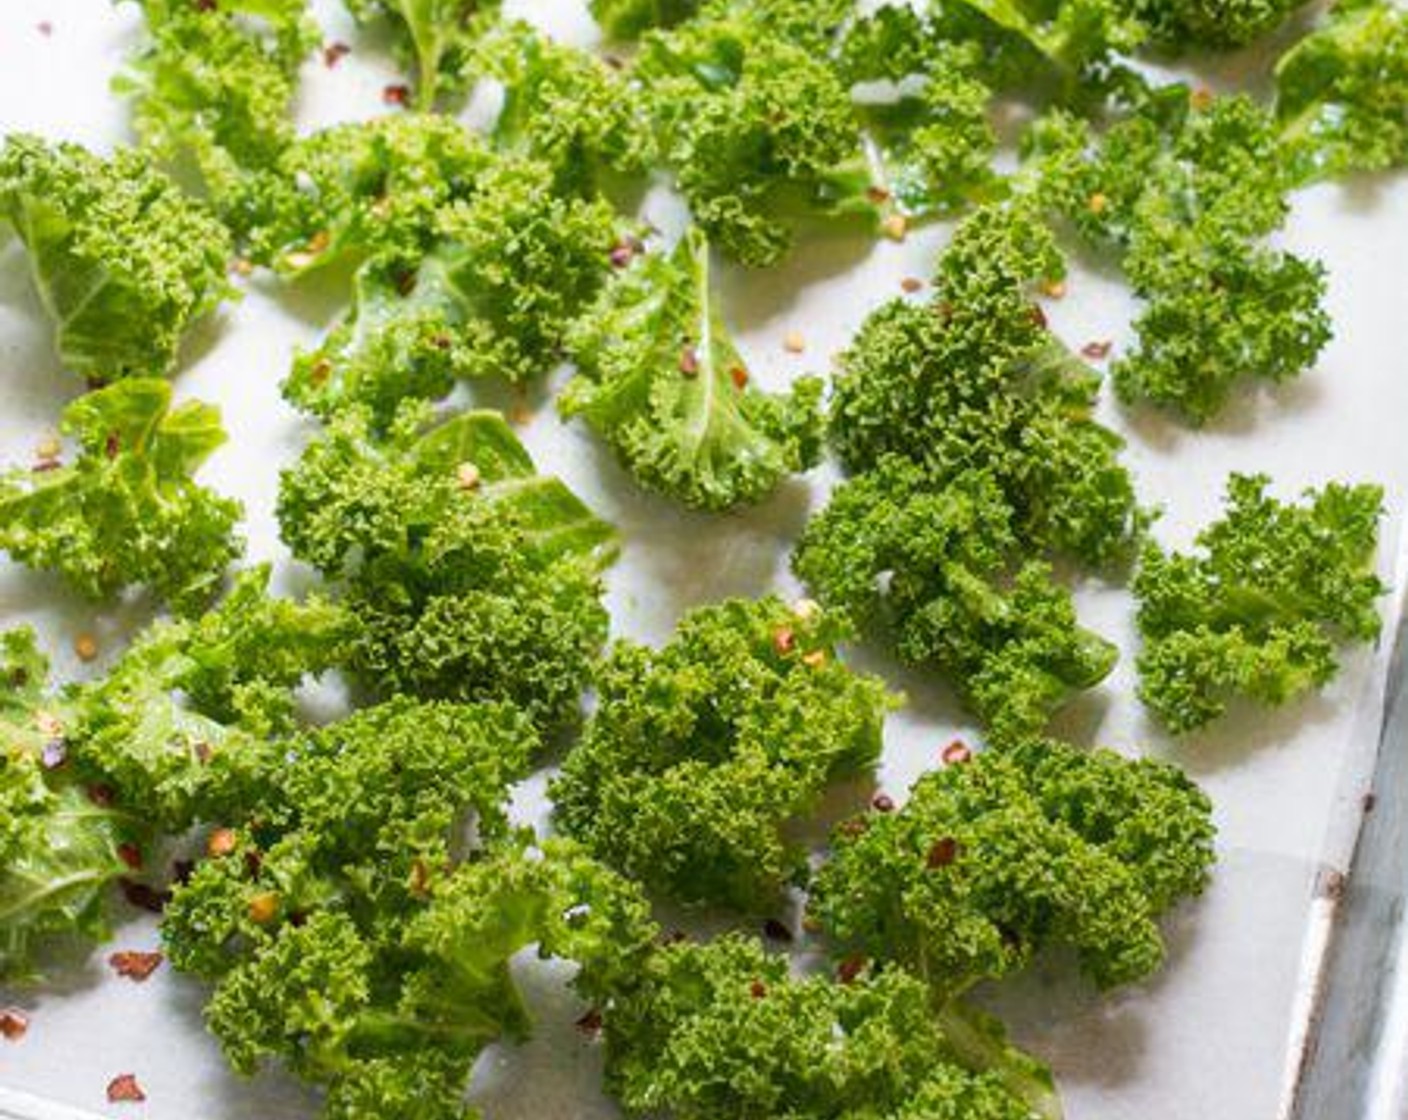 step 5 Line a baking tray with parchment paper, then arrange the kale leaves on the sheet in a single layer. Sprinkle Salt (1/2 tsp) over the kale leaves, followed by Crushed Red Pepper Flakes (1/2 tsp).